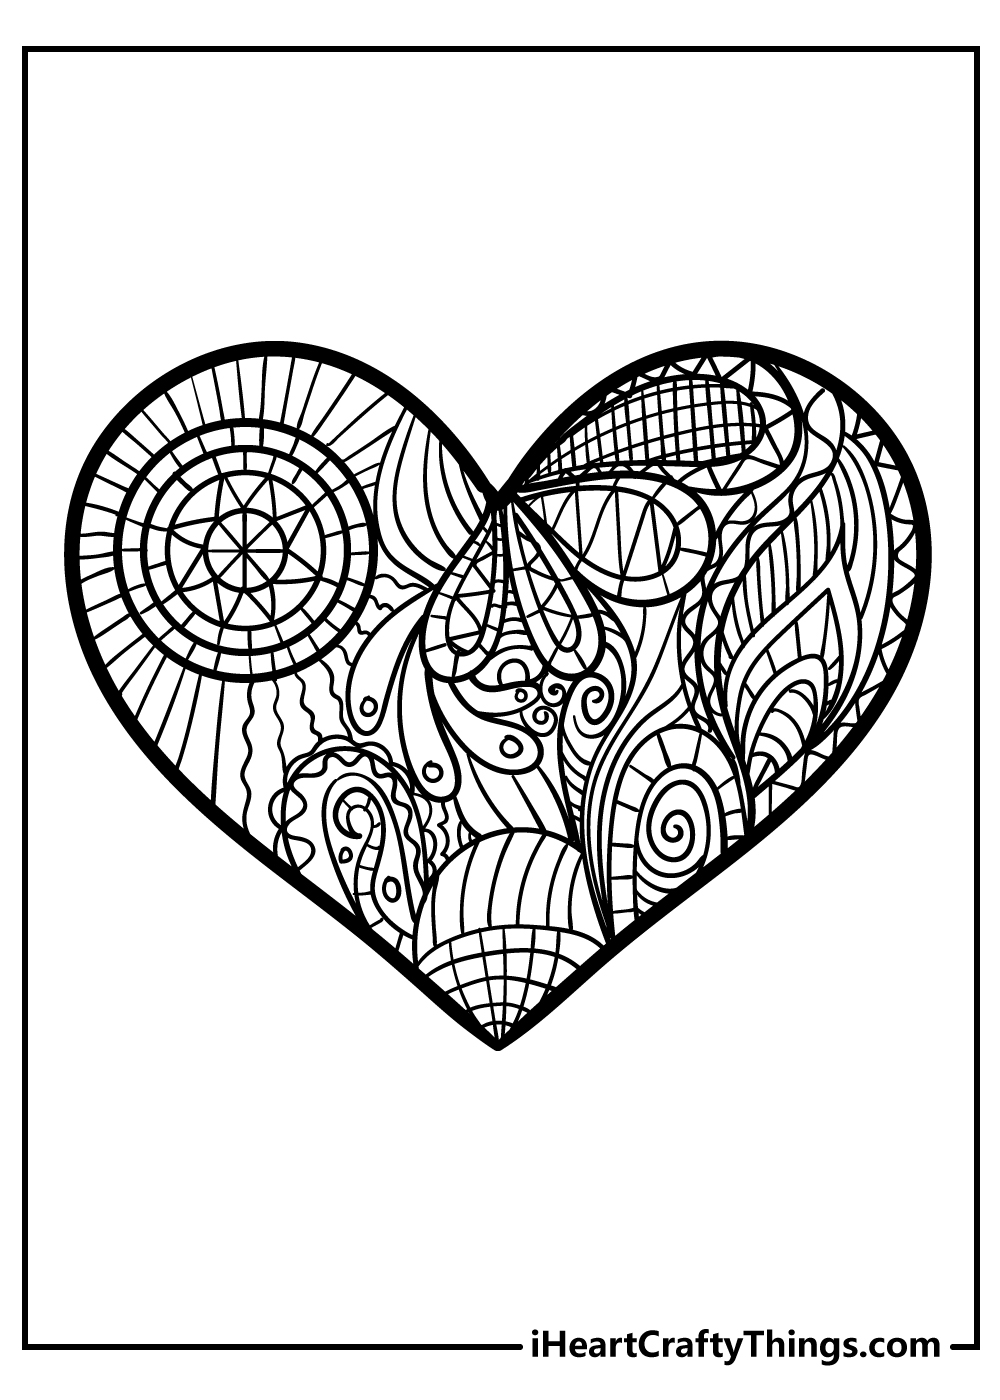 heart coloring sheet for children free download